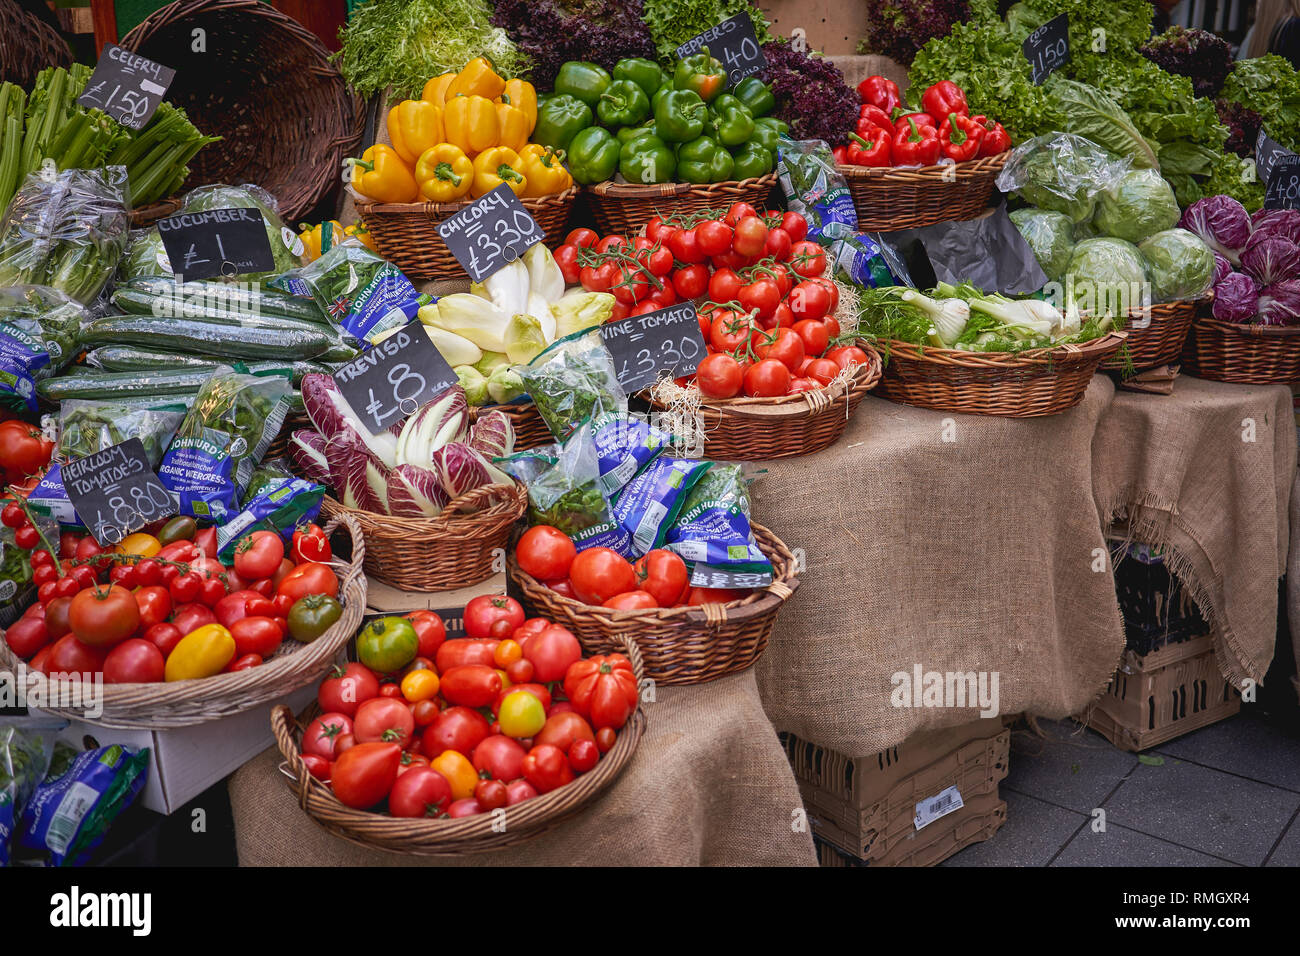 London, UK - June, 2018. Fruit and vegetables on sale at a stall in Borough Market, one of the oldest and biggest food market in London. Stock Photo